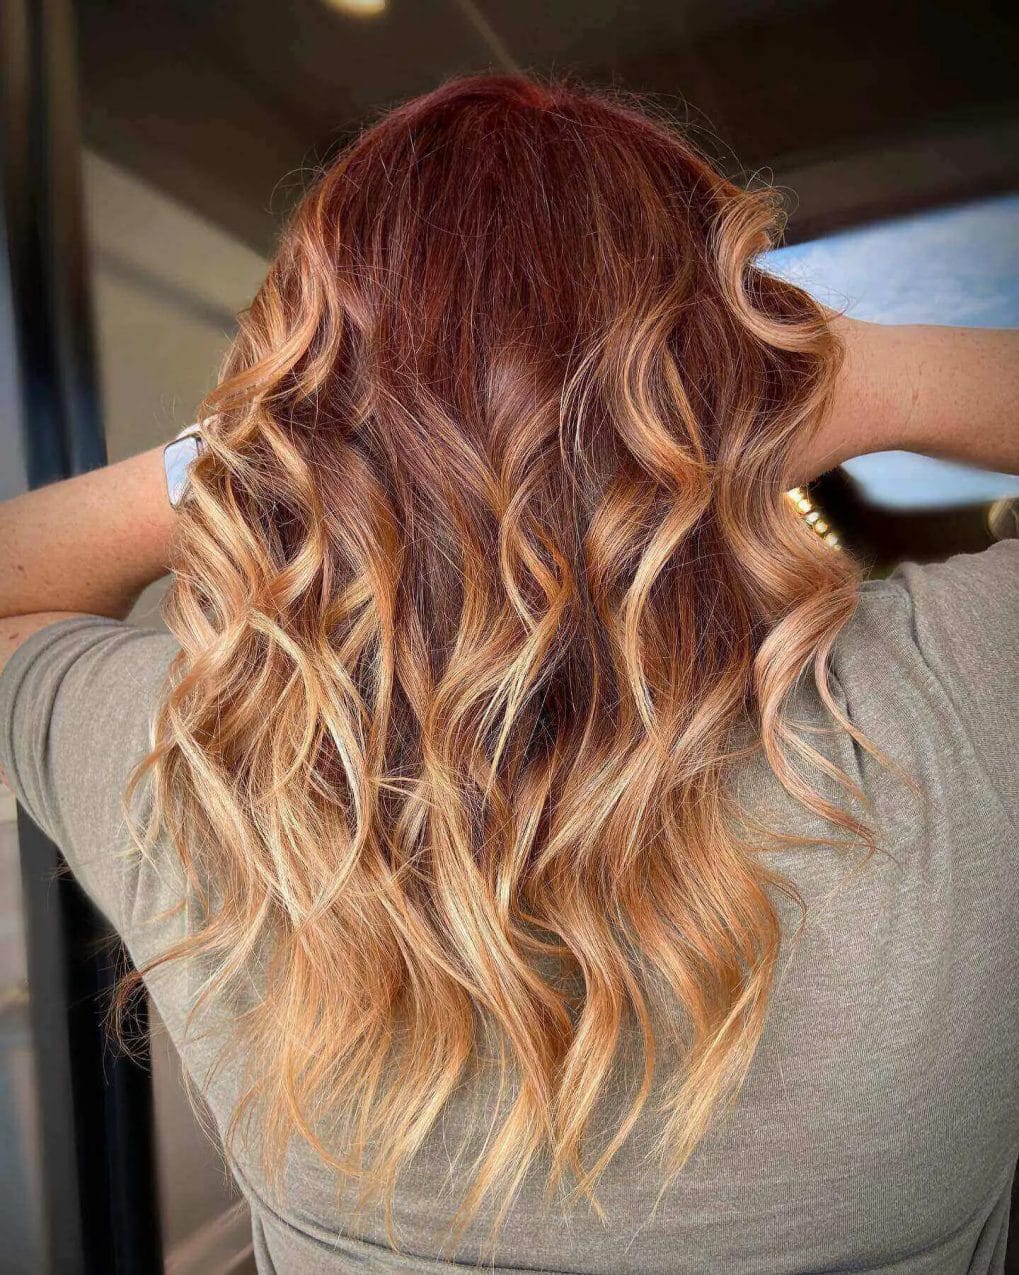 Rich red roots blending into golden blonde on textured waves.